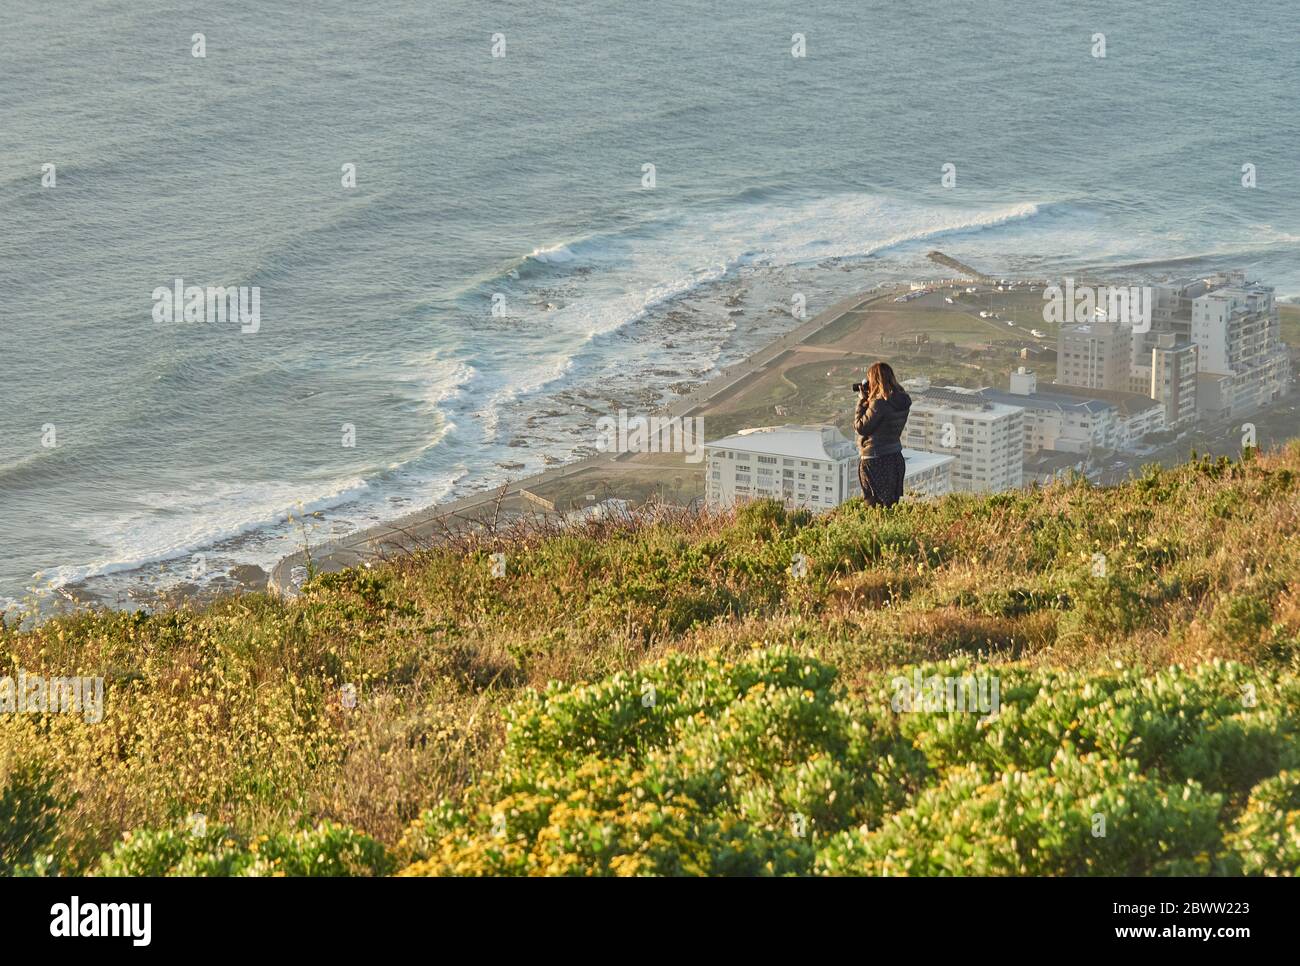 Woman taking pictures from the top of a hill, Signal Hill, South Africa Stock Photo